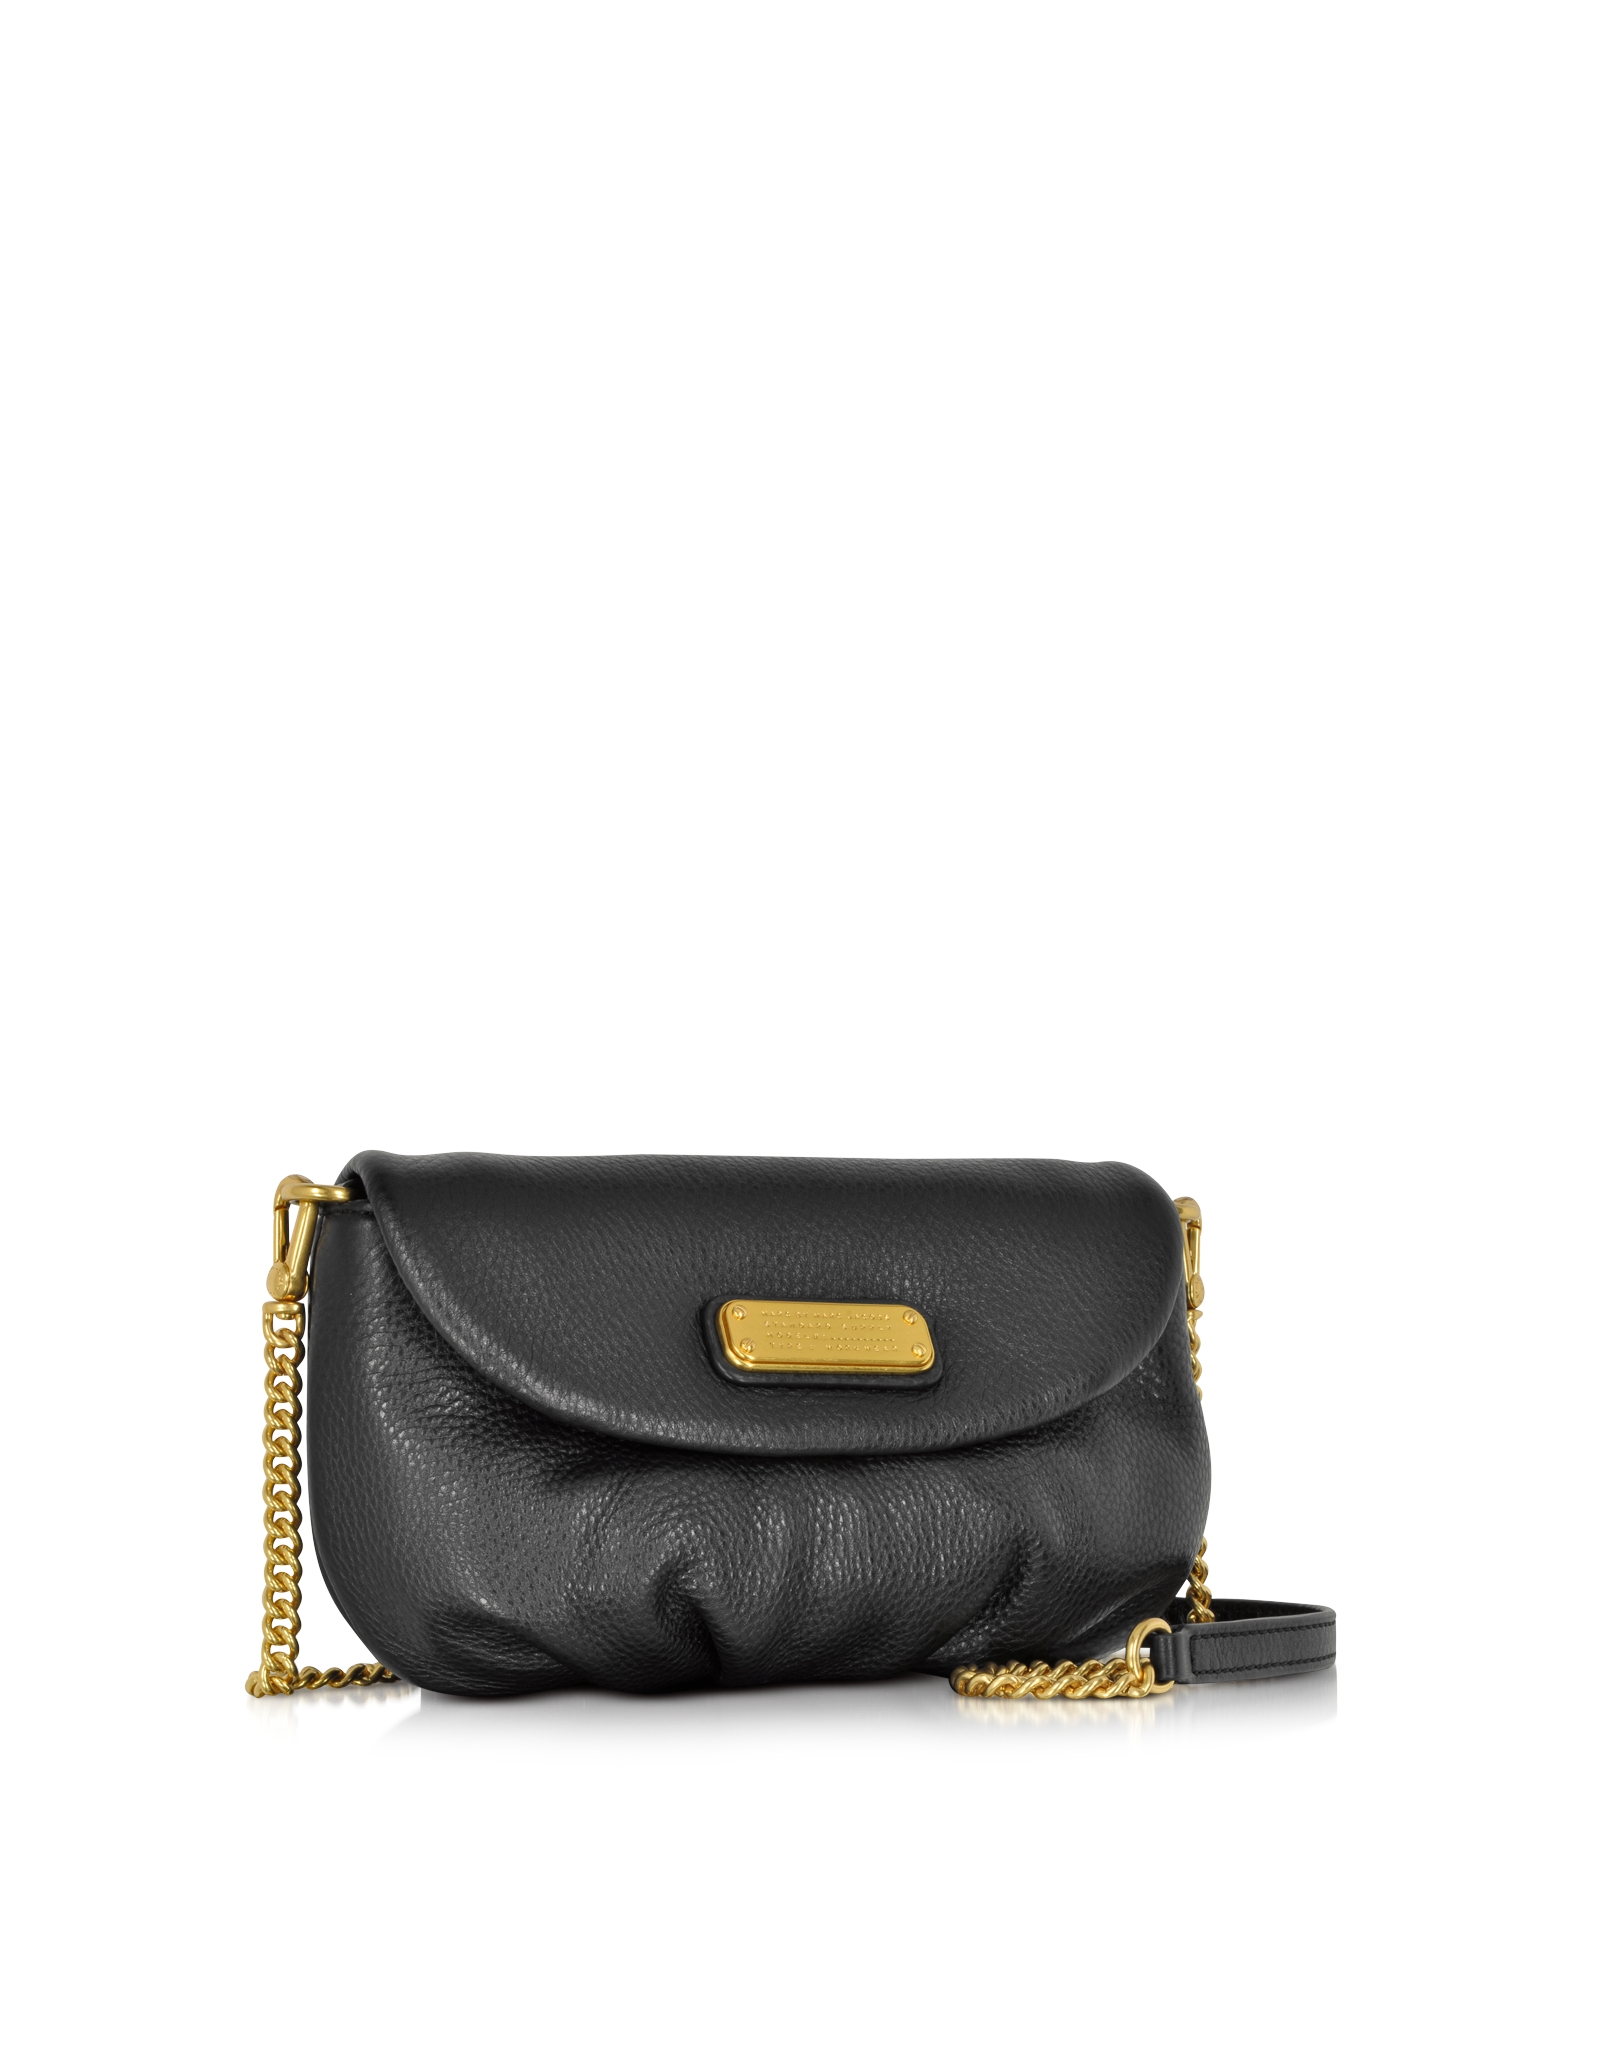 Lyst - Marc By Marc Jacobs New Q Karlie Black Leather Crossbody Bag in Black